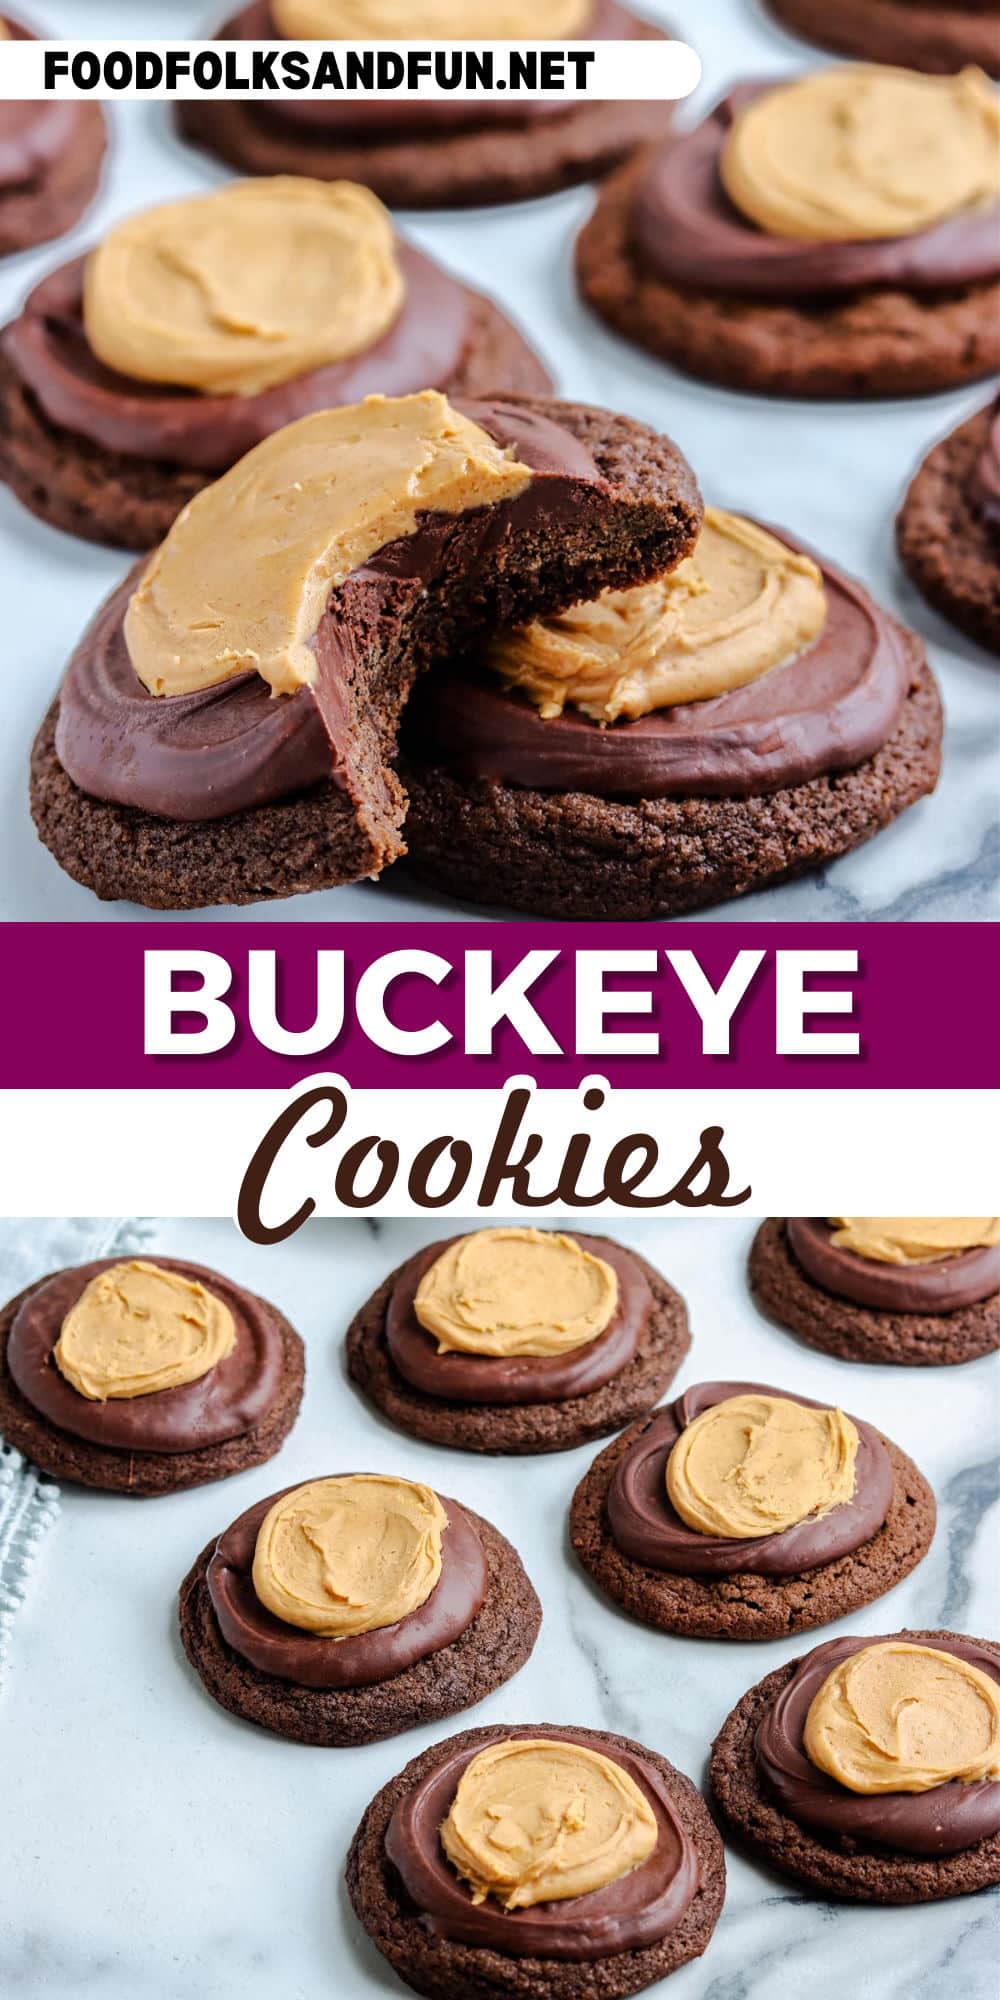 Buckeye Cookies are a fun twist on the classic Buckeye candy. These cookies are ideal whenever you have a chocolate and peanut butter craving! via @foodfolksandfun